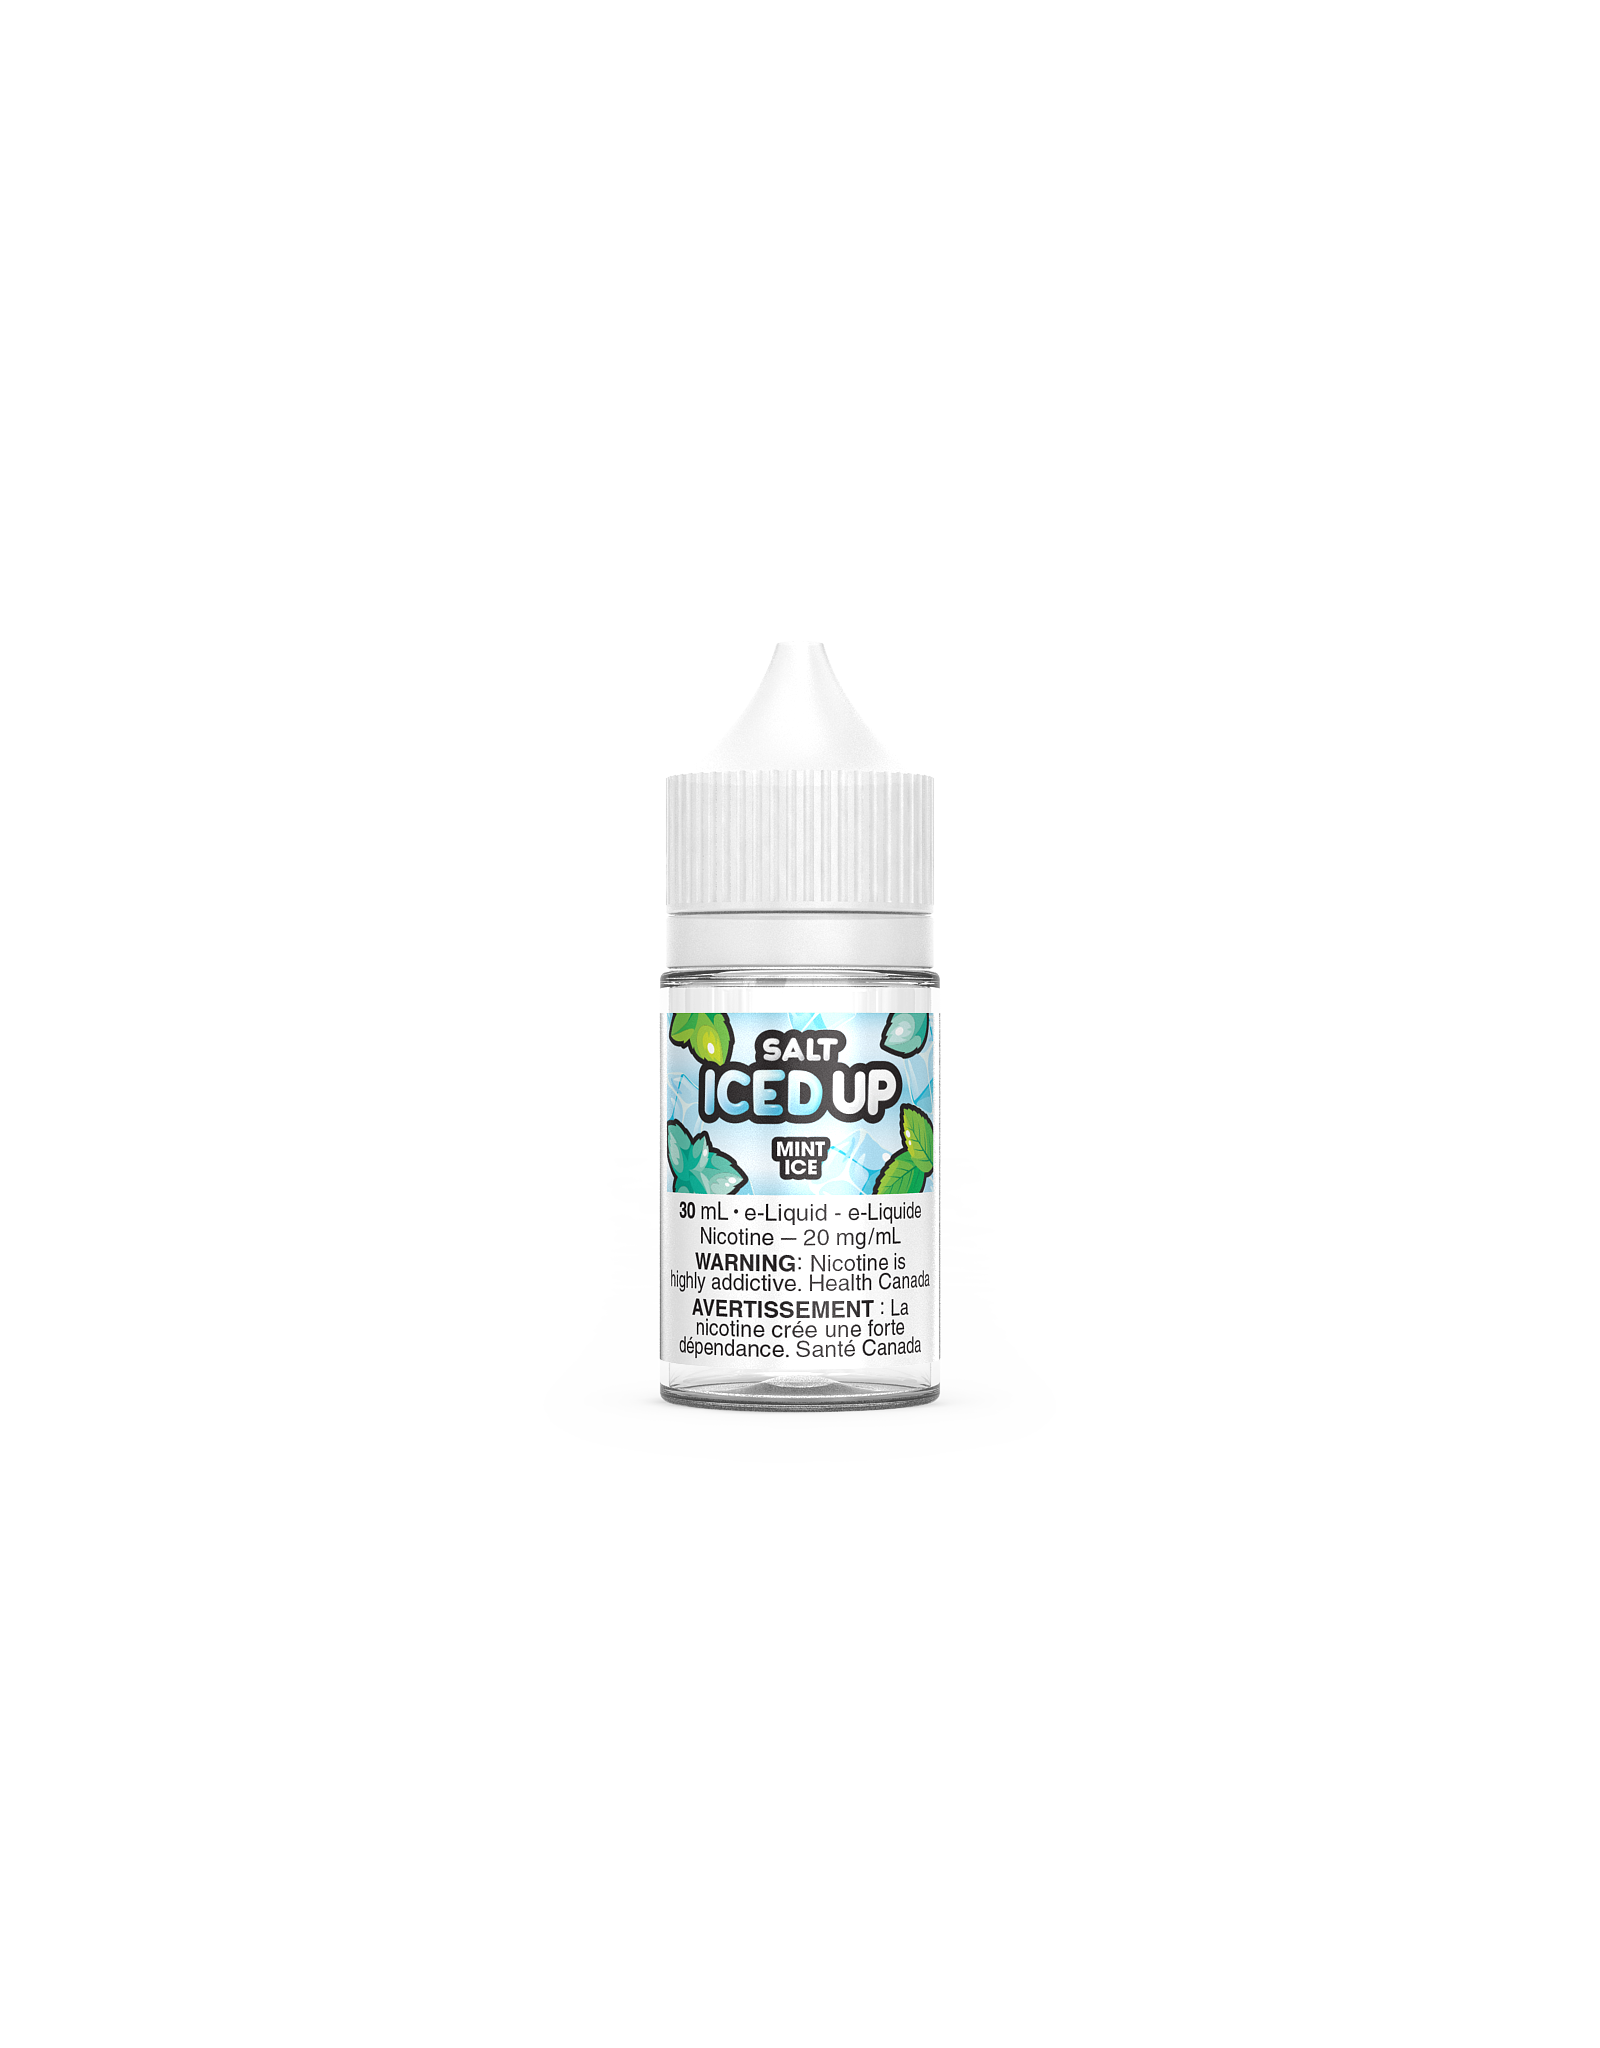 ICED UP MINT ICE BY ICED UP (30ml/3mg)